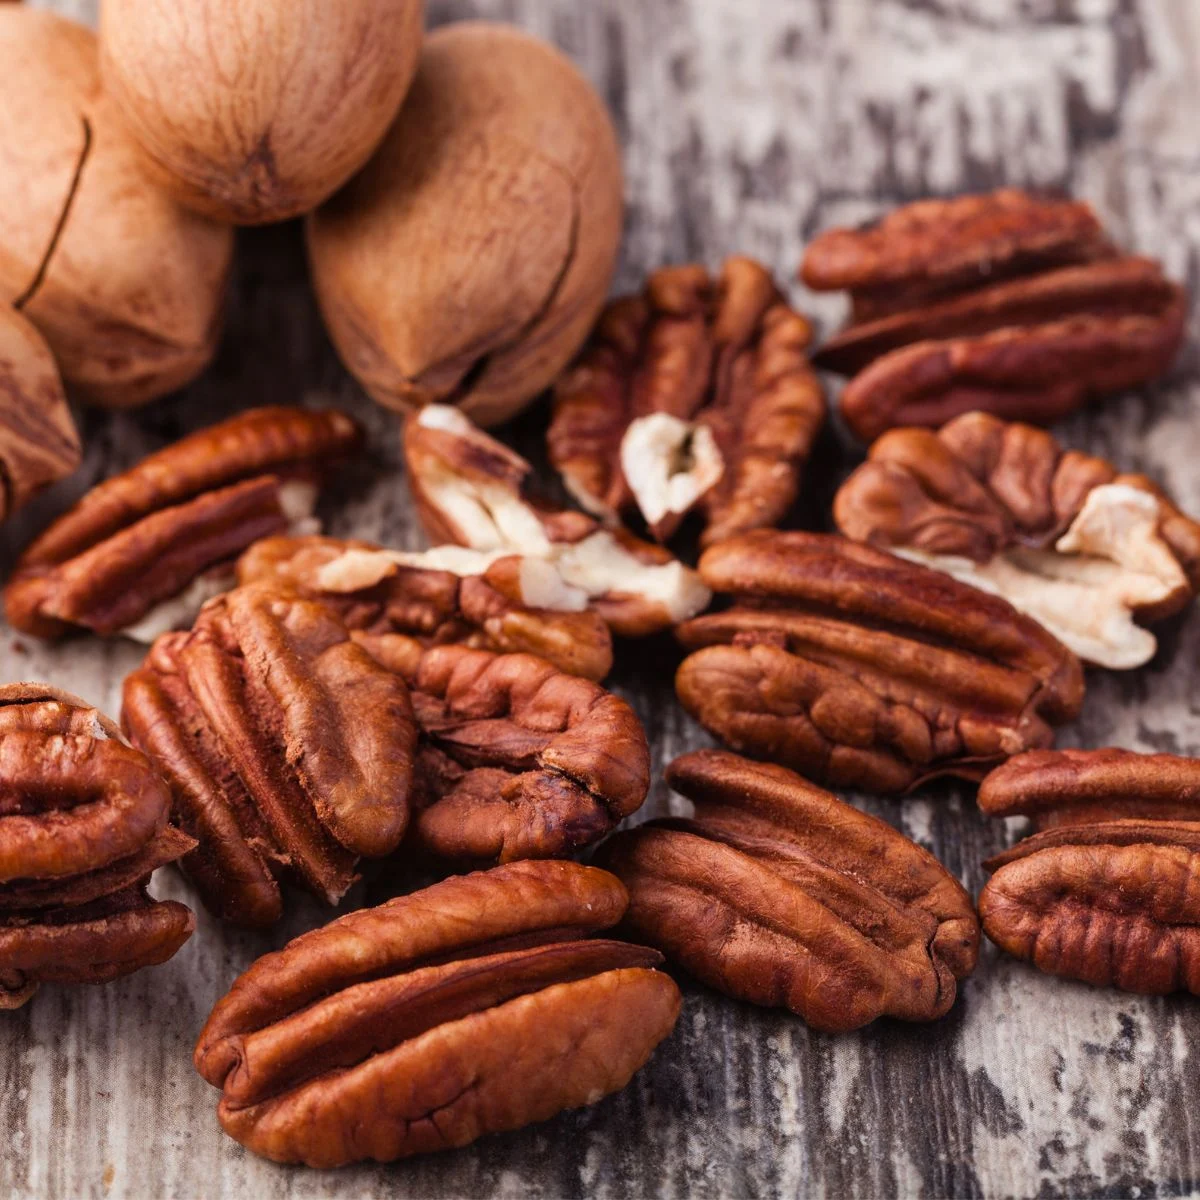 can i substitute walnuts for pecans